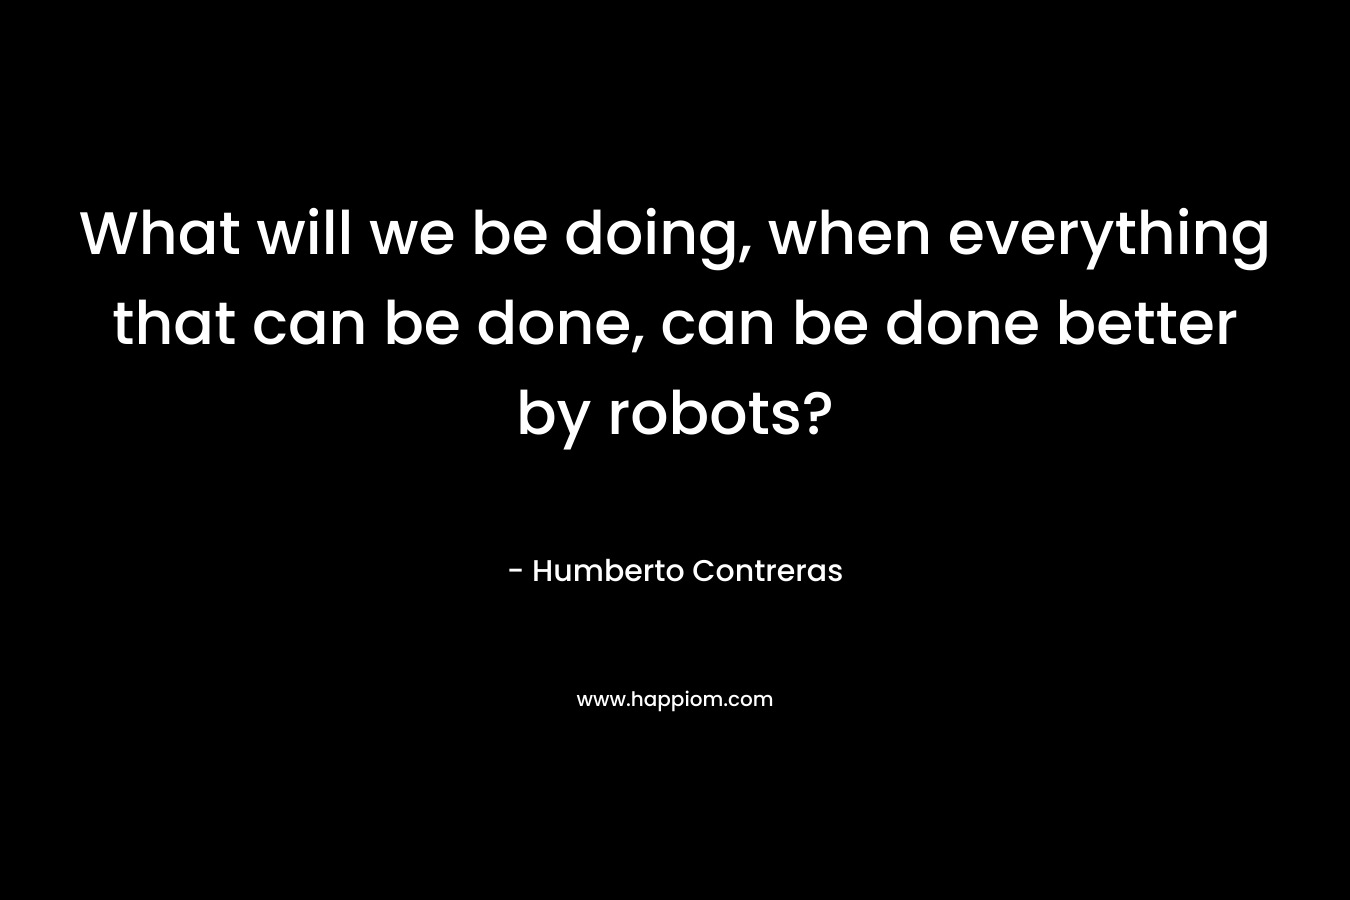 What will we be doing, when everything that can be done, can be done better by robots? – Humberto Contreras